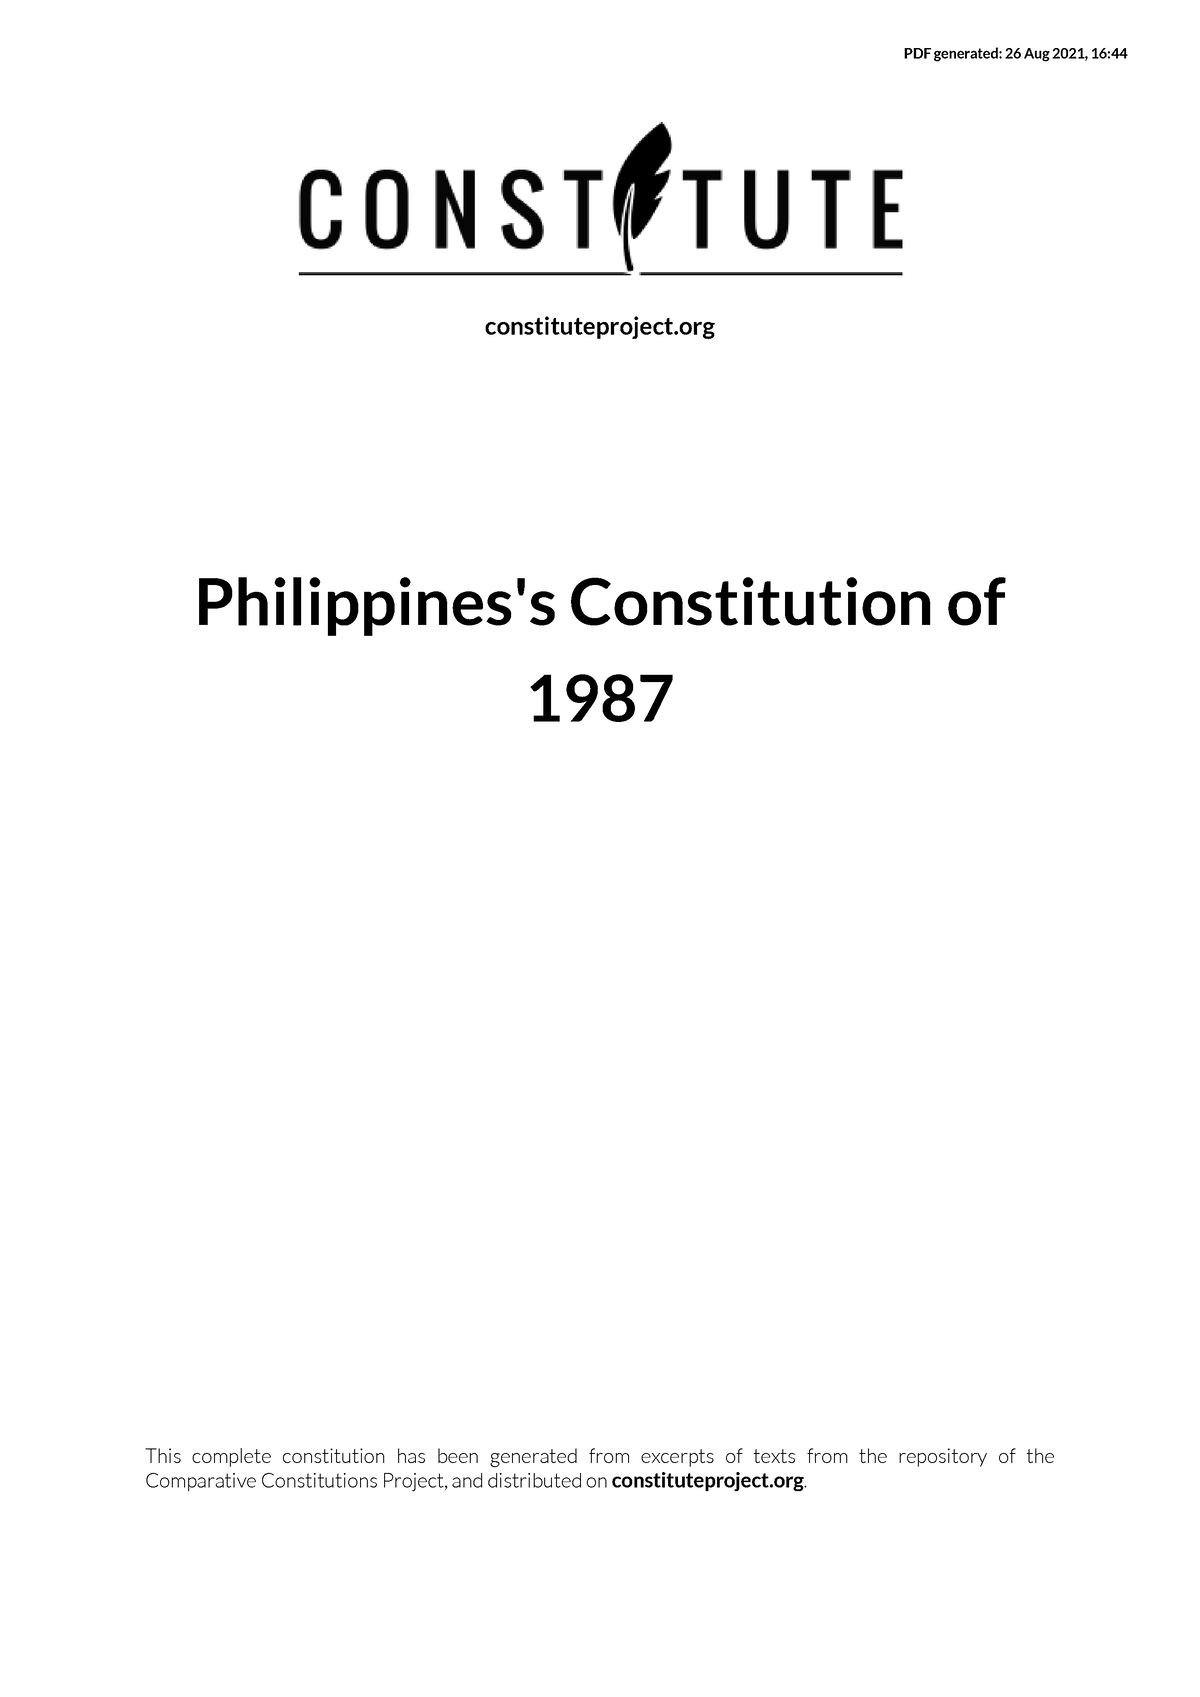 research paper on philippine constitution